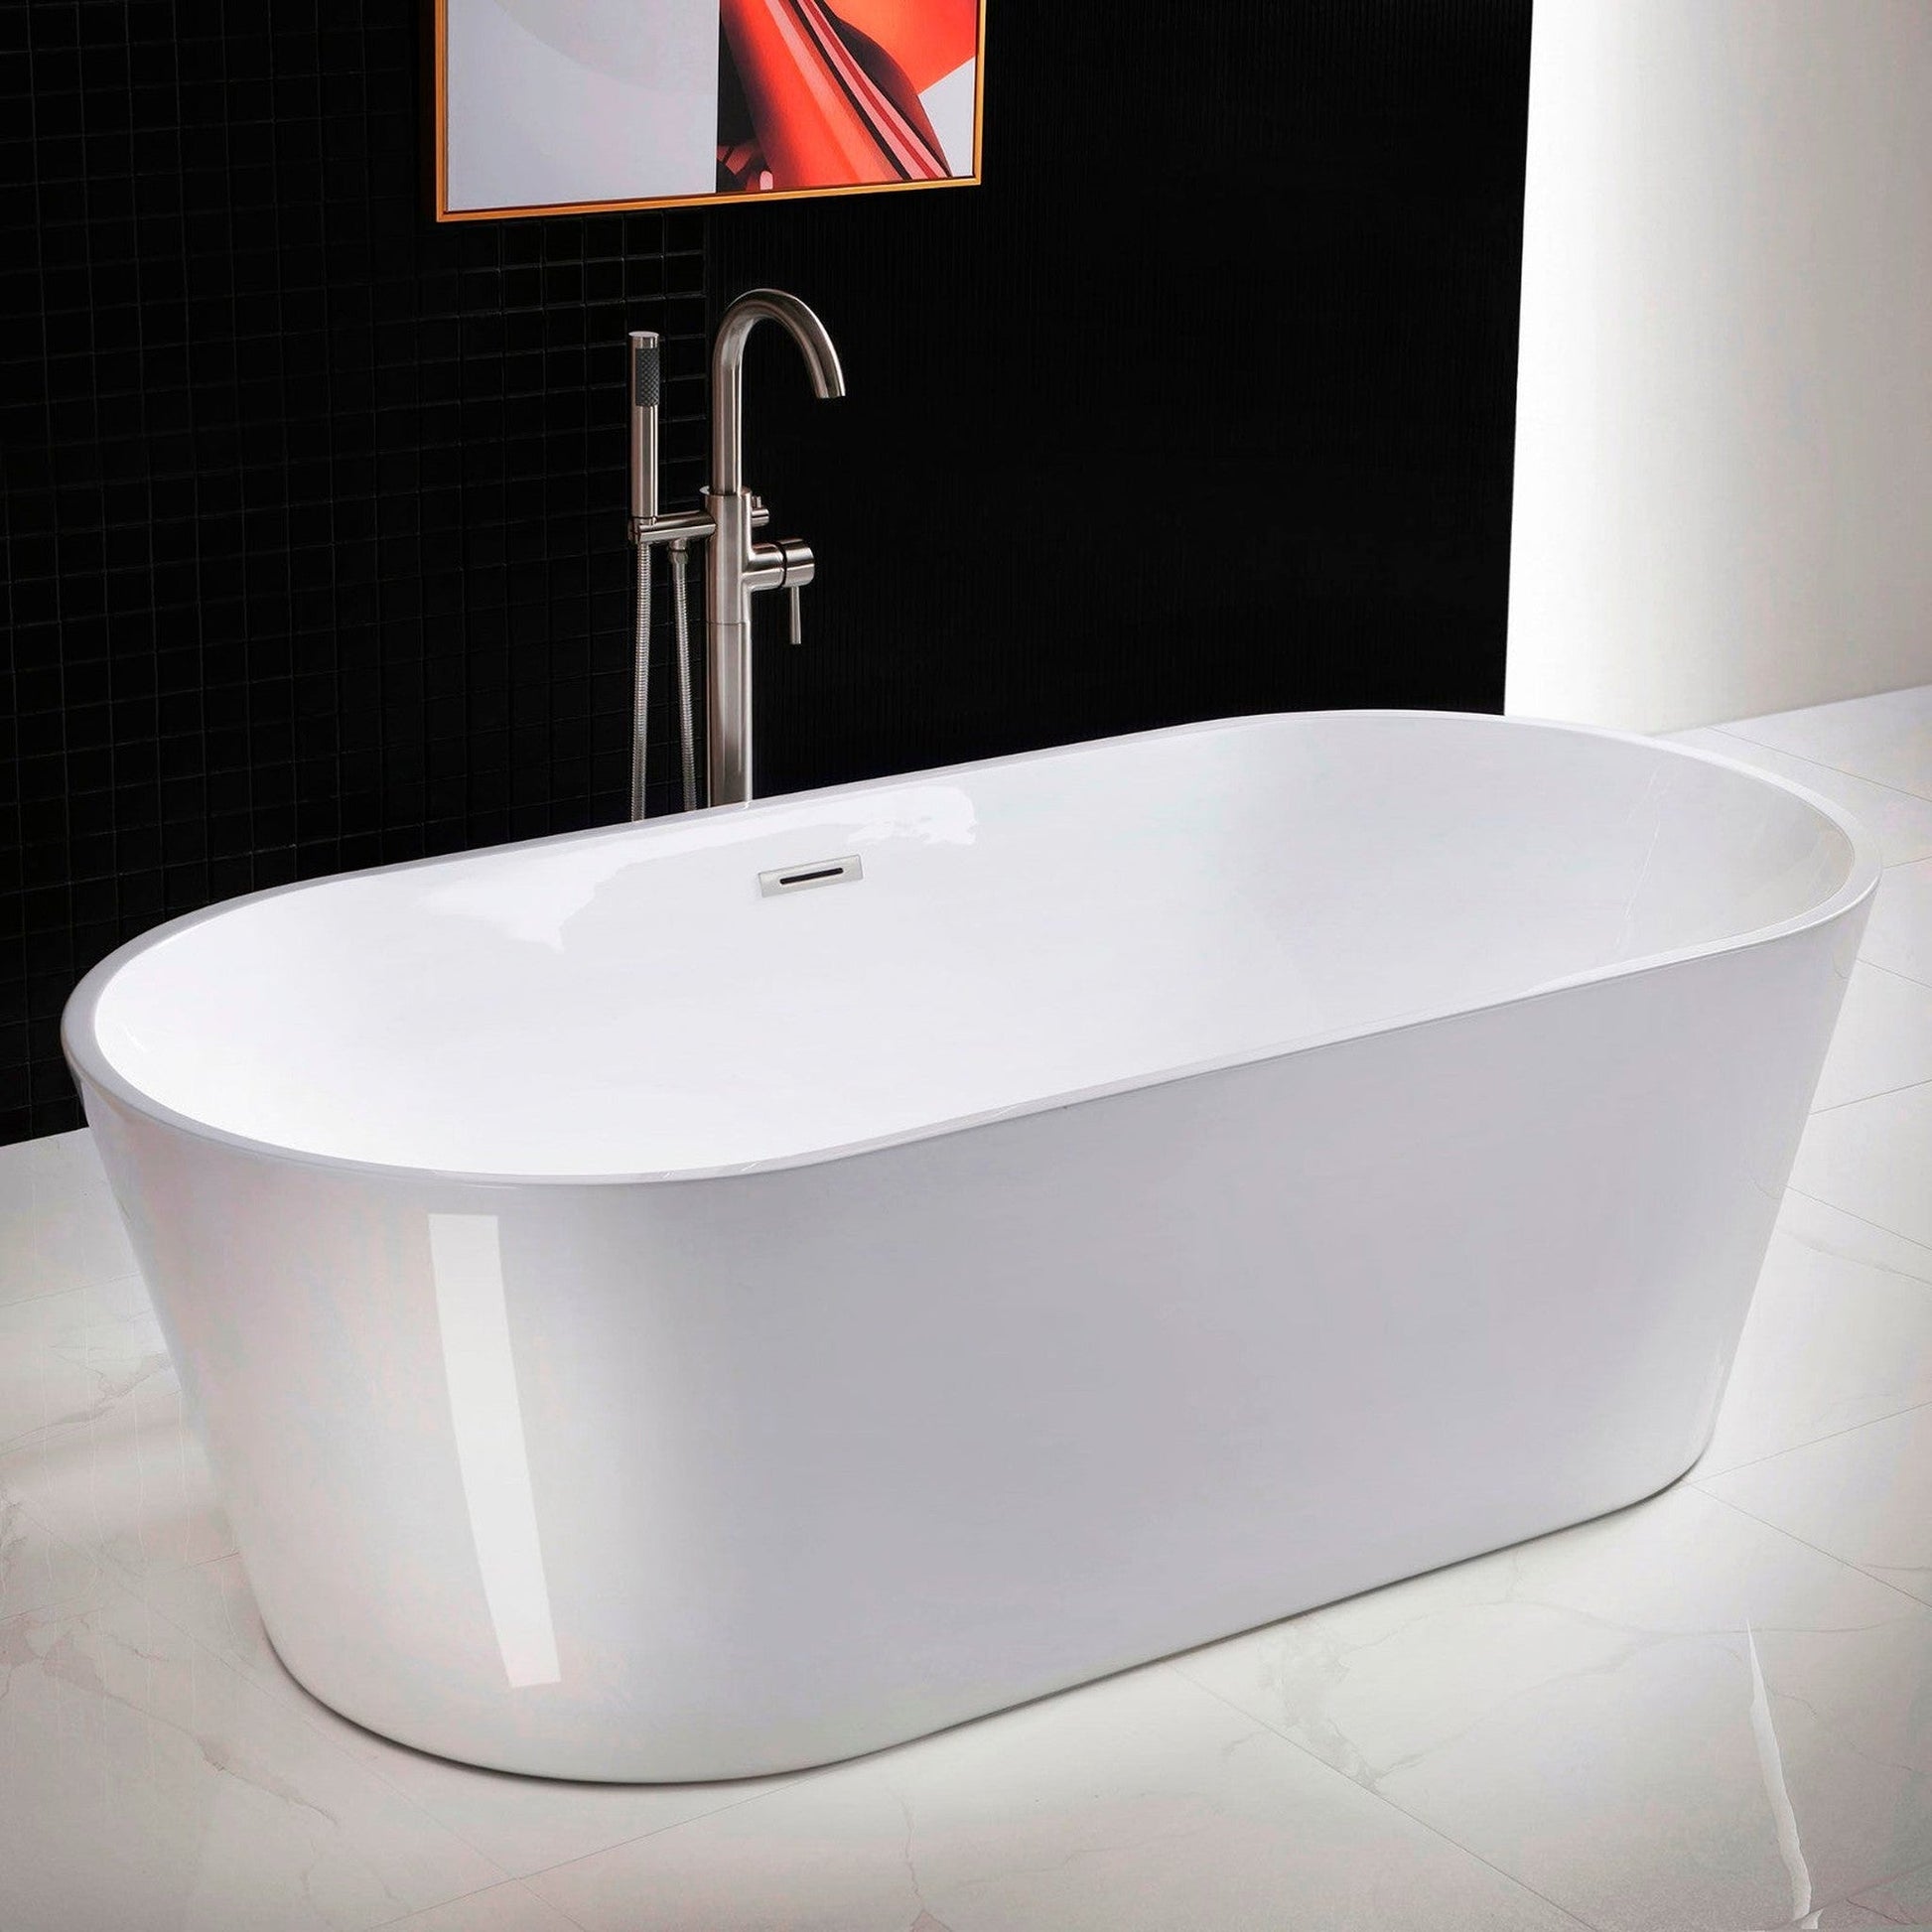 WoodBridge 71" White Acrylic Freestanding Contemporary Soaking Bathtub With Brushed Nickel Drain, Overflow, F0070BNDR Tub Filler and Caddy Tray